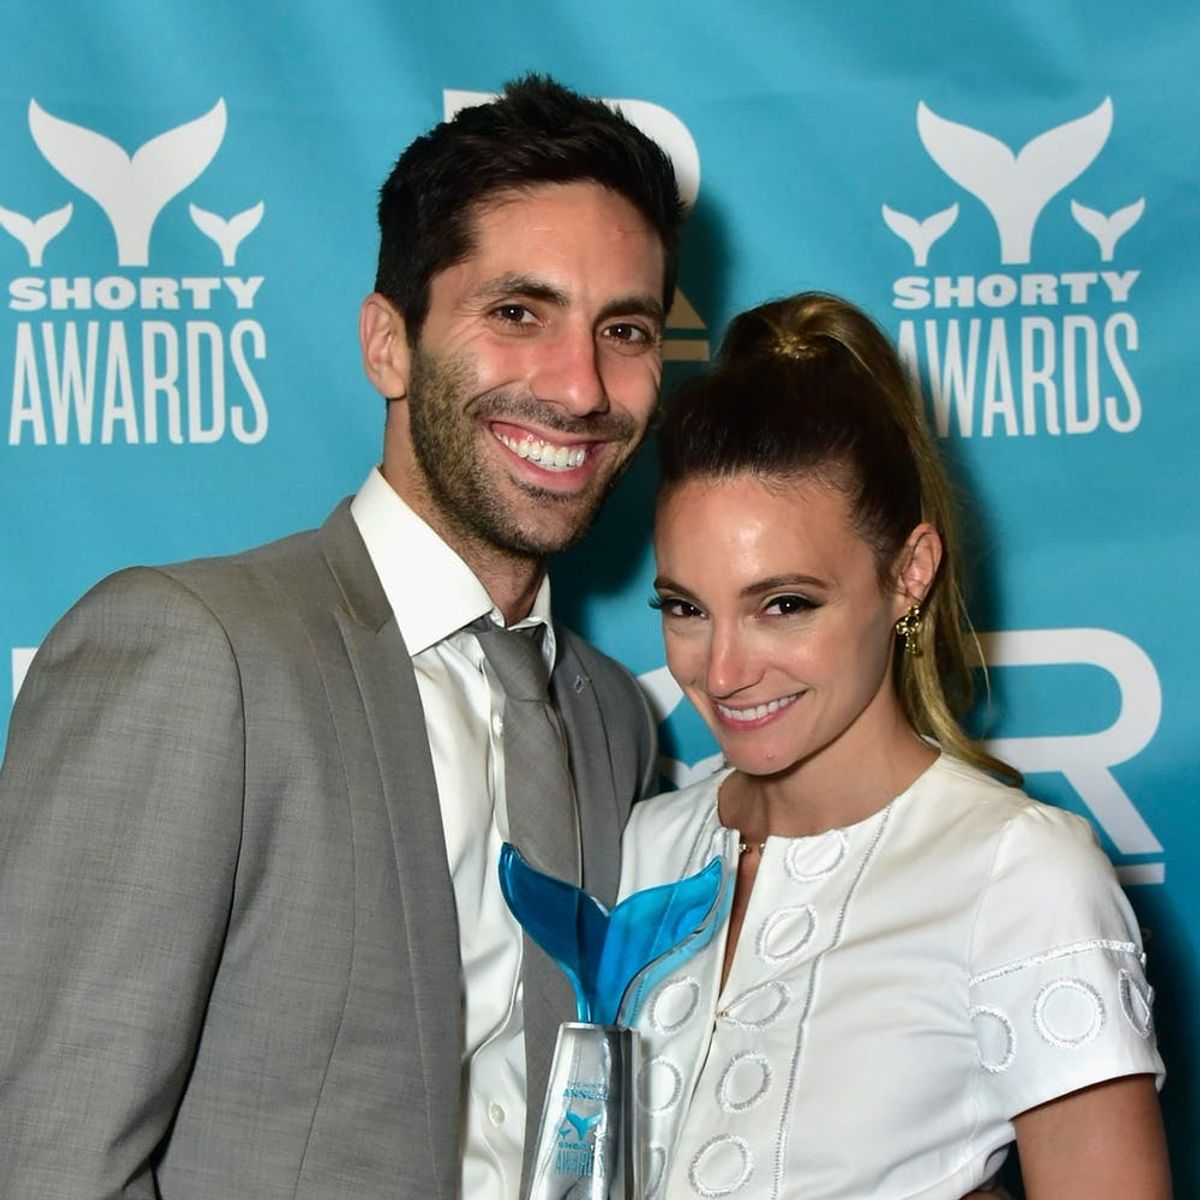 See the First Pics from “Catfish” Star Nev Schulman’s Hamptons Wedding